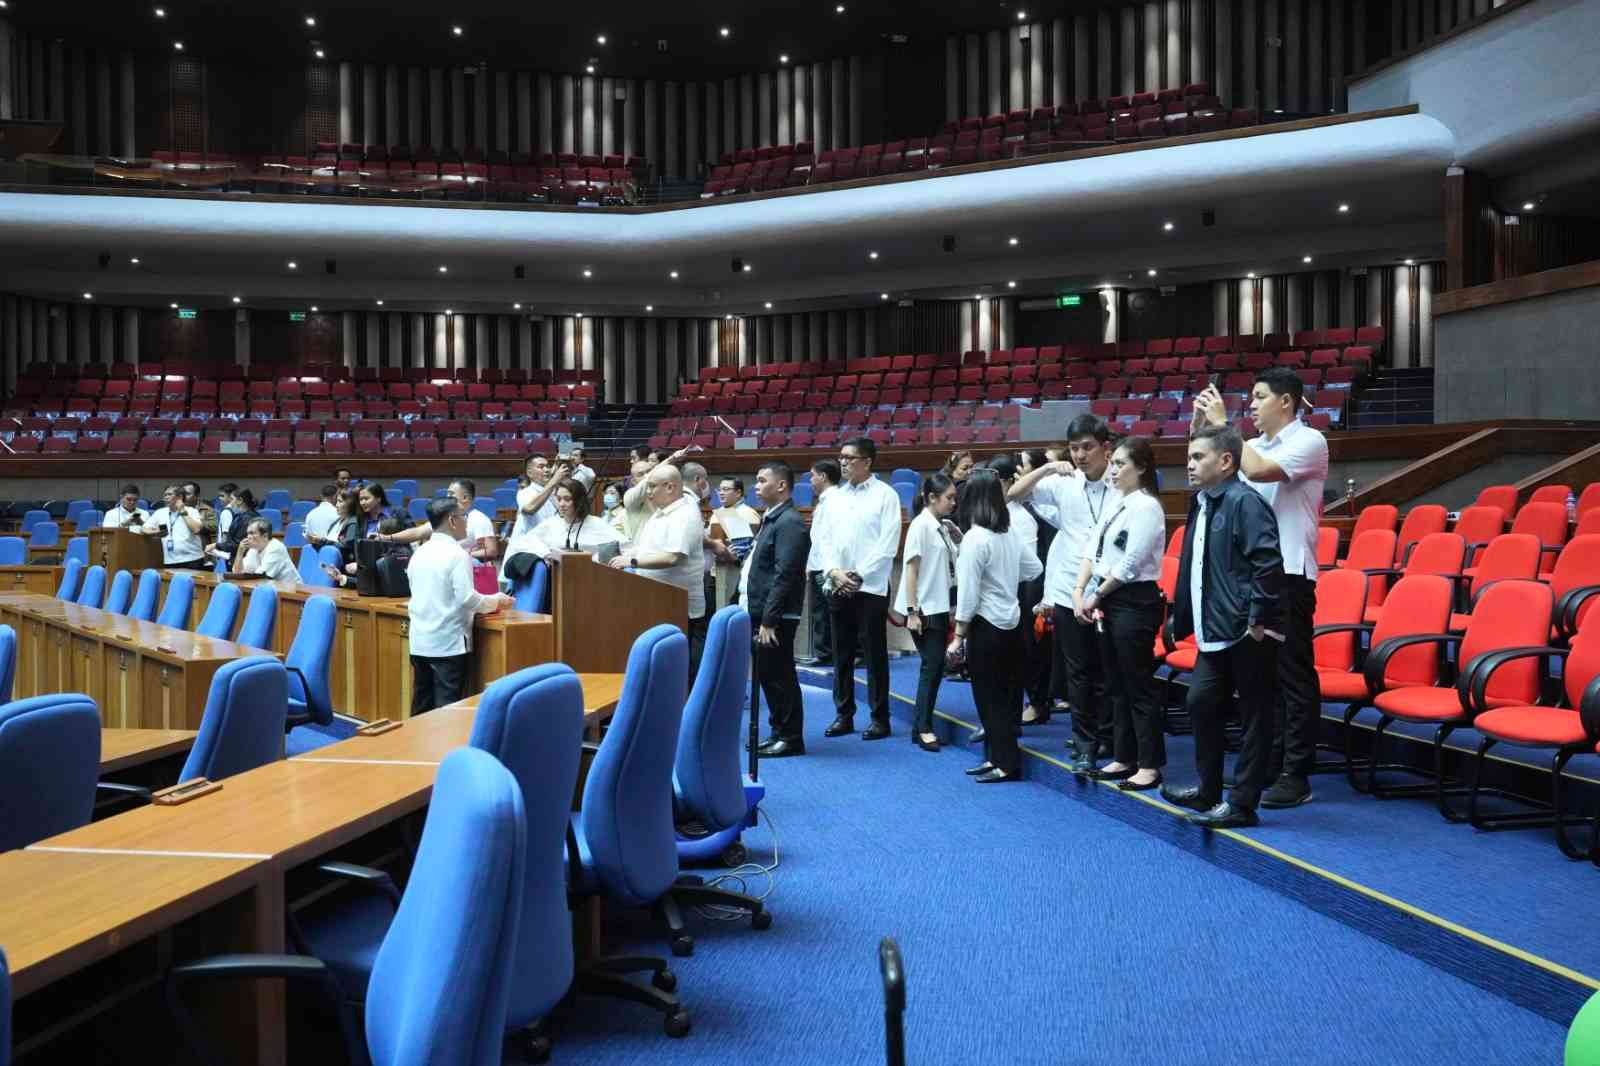 HRep preparation in final stages; ready to host PBBM's 3rd SONA